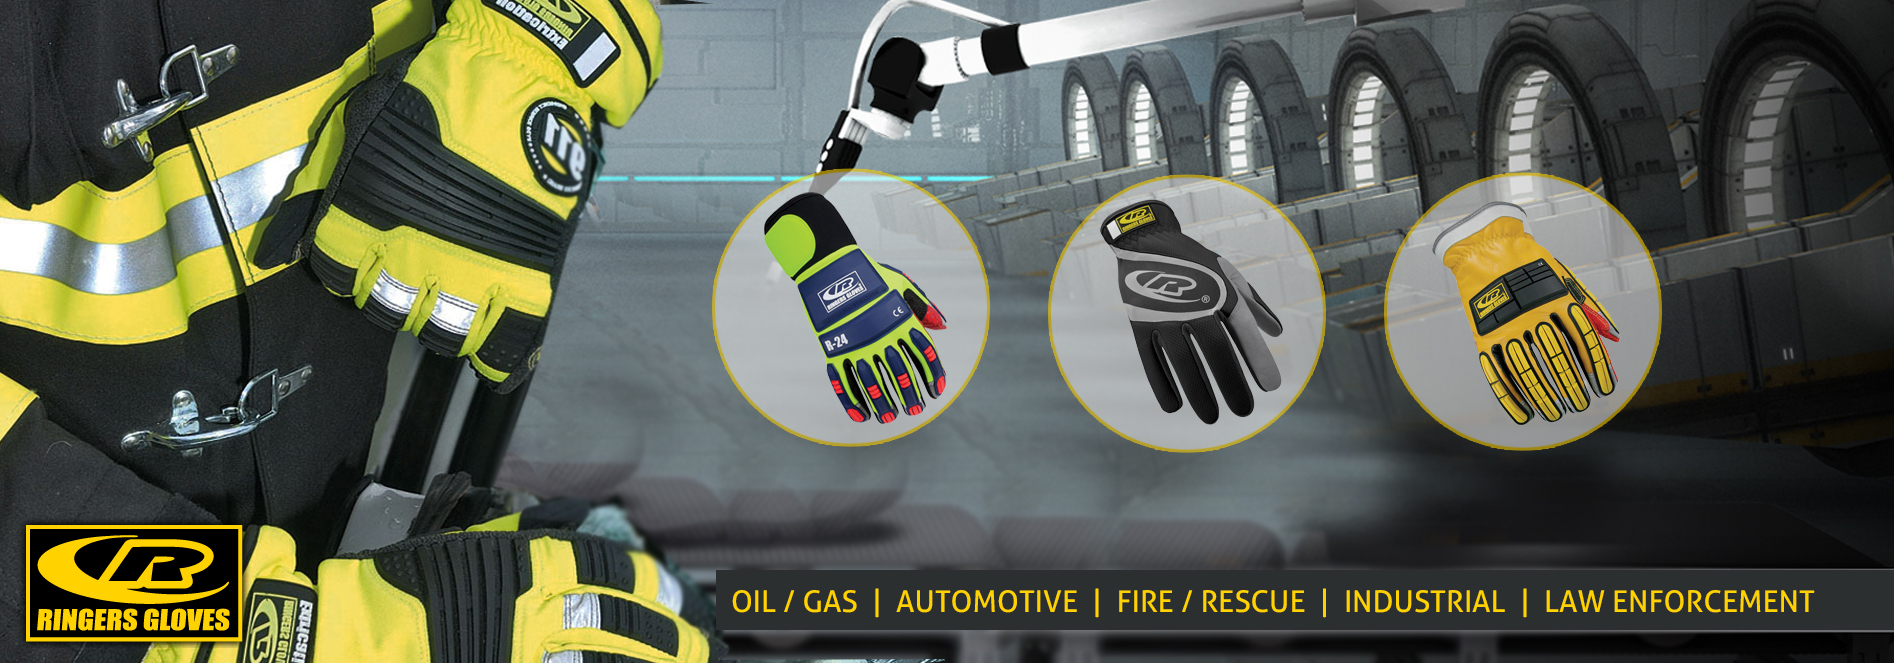 RINGERS GLOVES | HAND PROTECTION | Al Asayel Health & Safety